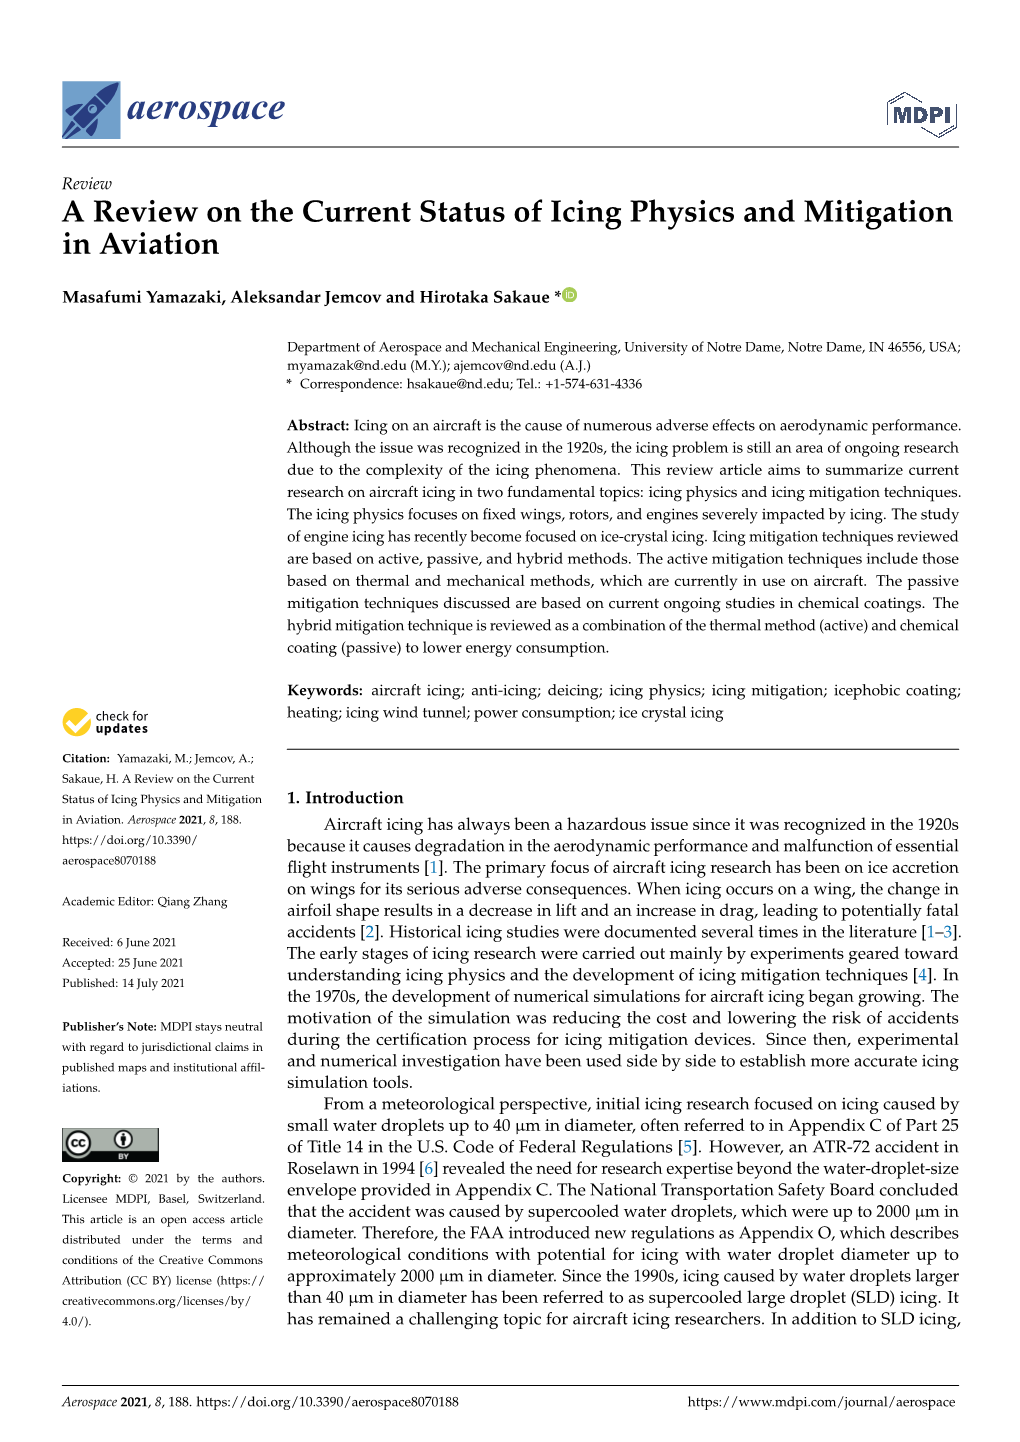 A Review on the Current Status of Icing Physics and Mitigation in Aviation